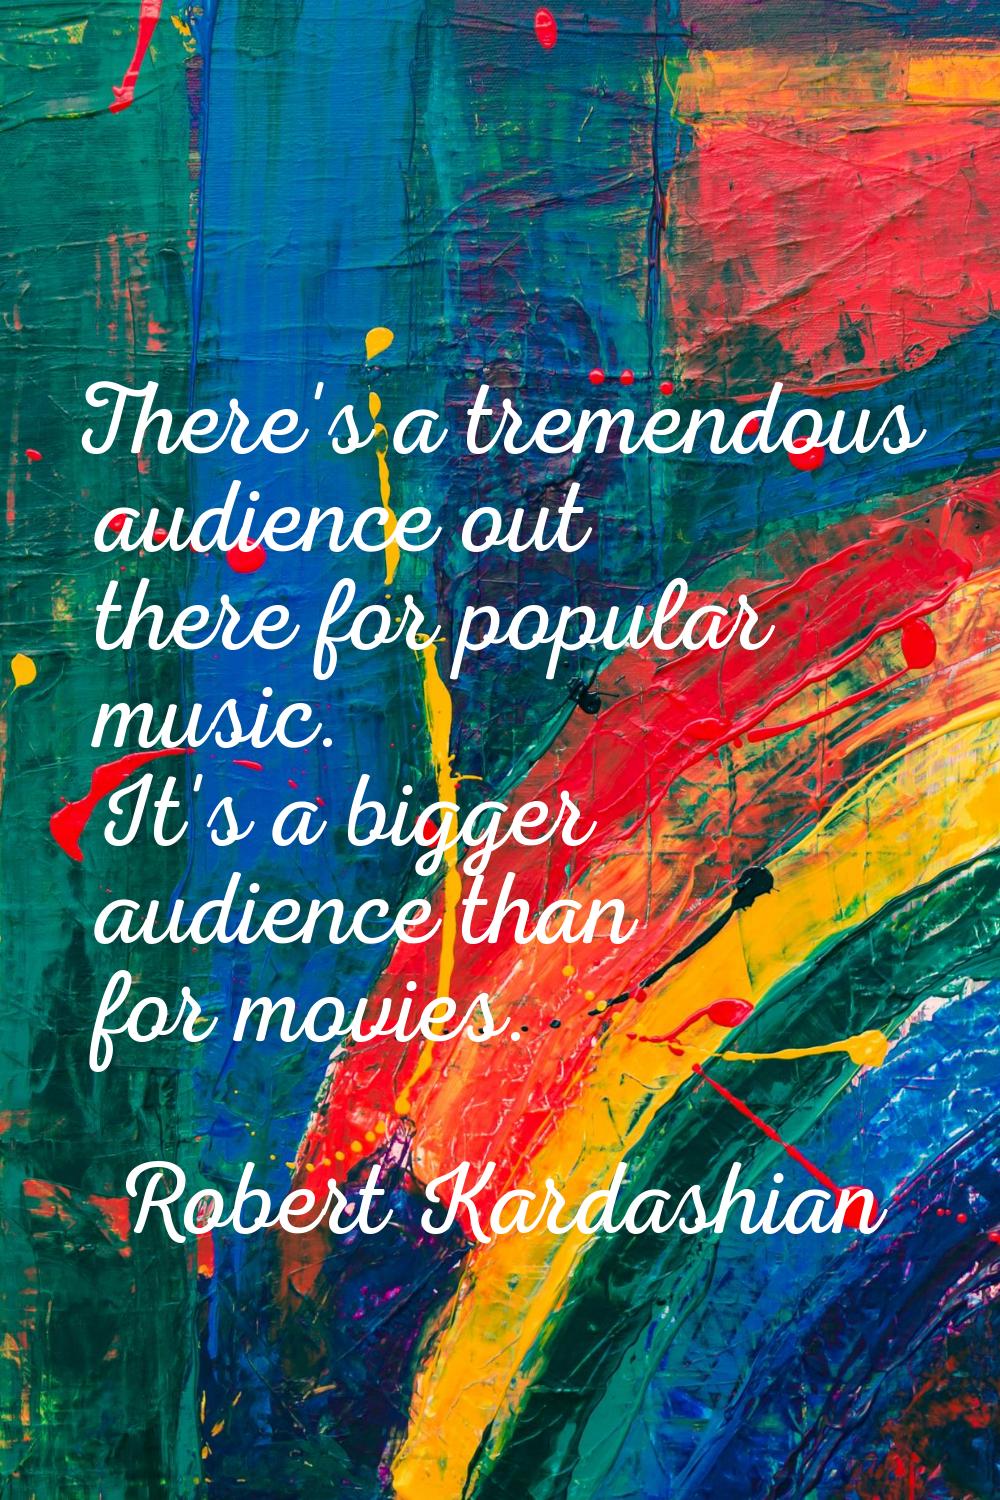 There's a tremendous audience out there for popular music. It's a bigger audience than for movies.